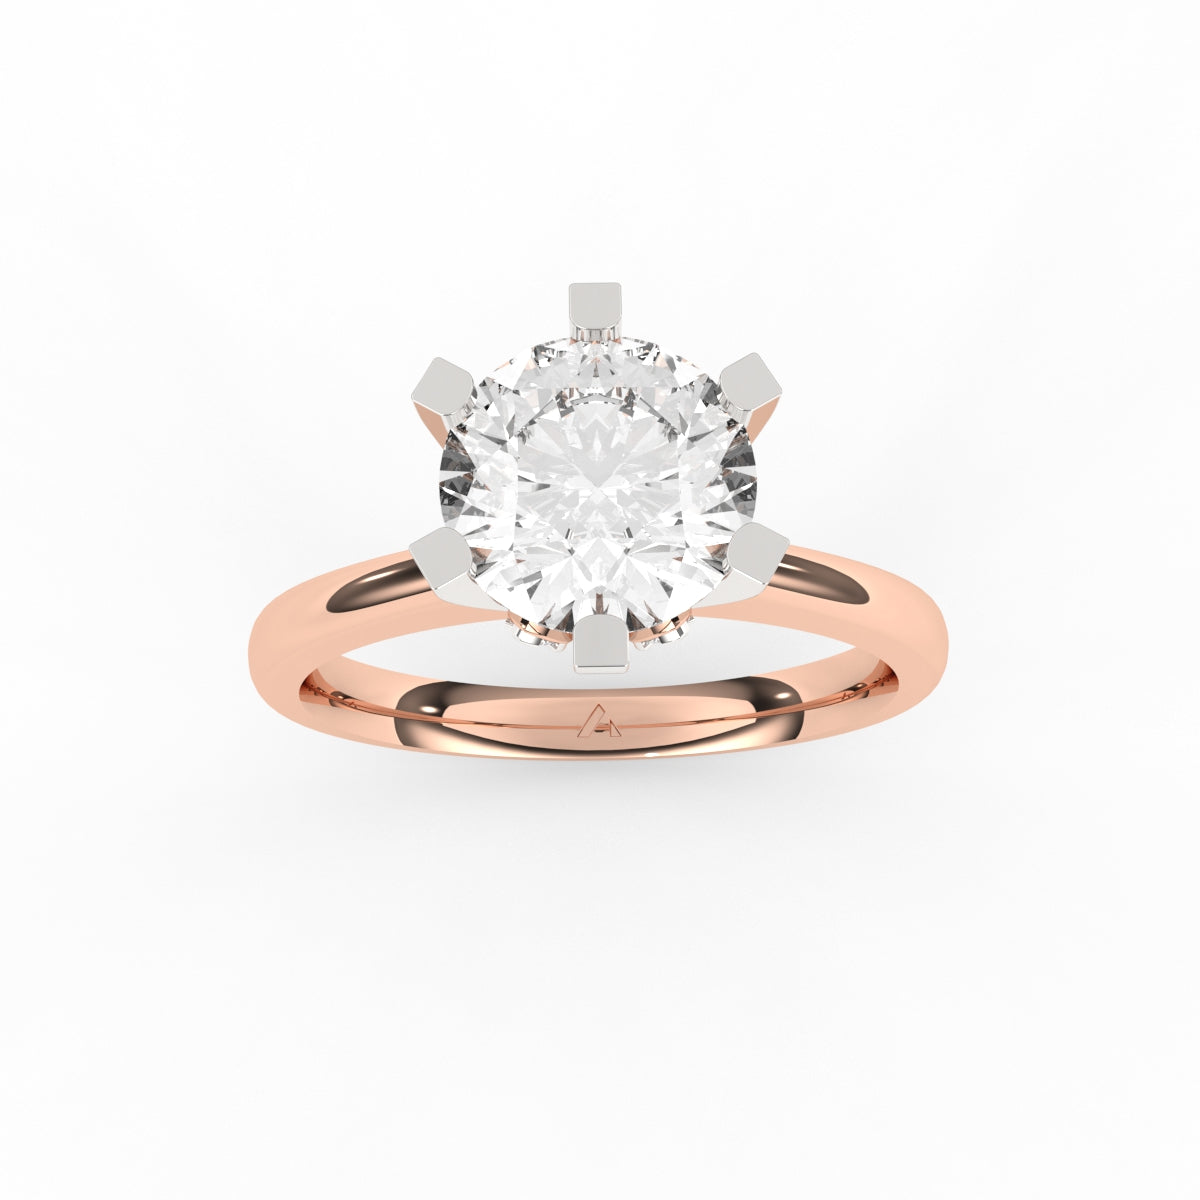 Six Prongs Solitaire Diamond Ring